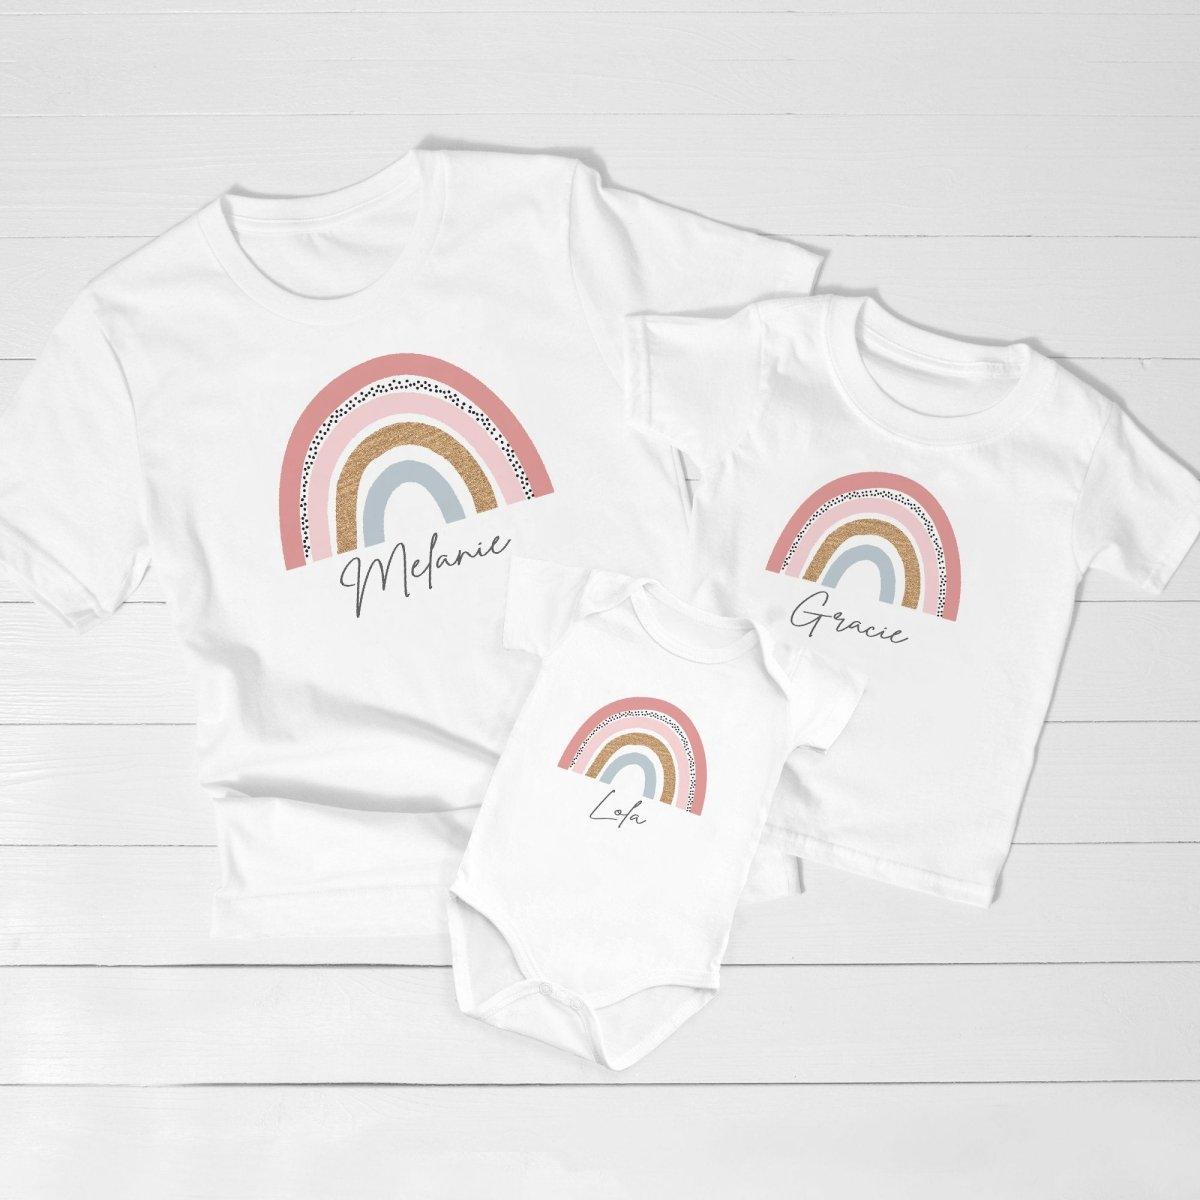 Personalised Rainbow T-shirt, Personalised Rainbow Top, Rainbow Lounge T-shirt, Lounge-wear Tops, Rainbow Clothes, Rainbow Gifts, - Amy Lucy